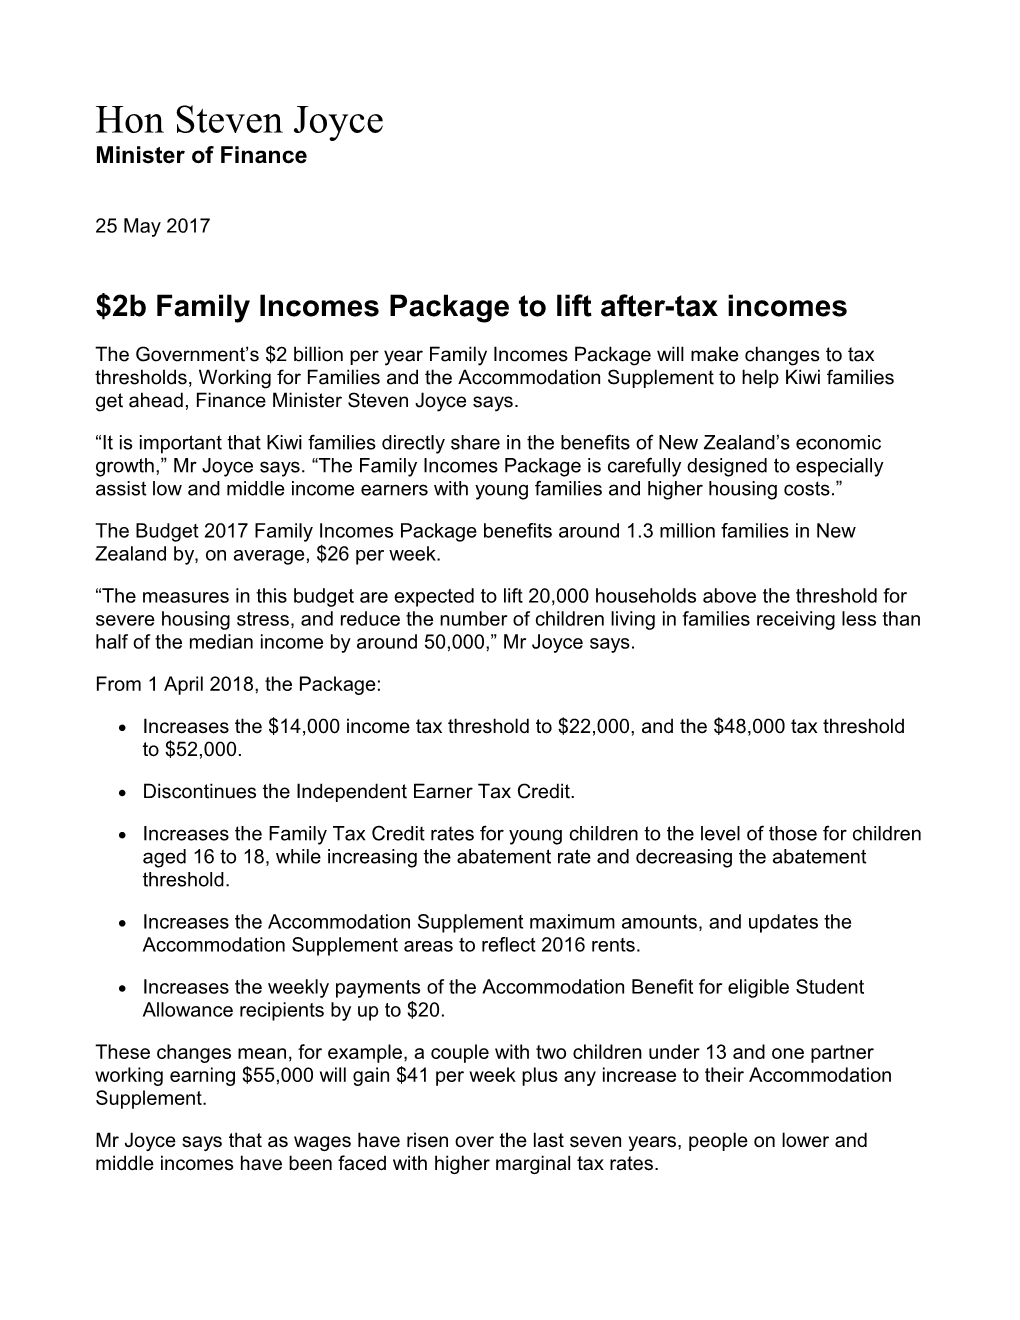 Budget 2017 - $2B Family Incomes Package to Lift After-Tax Incomes (25 May 2017)